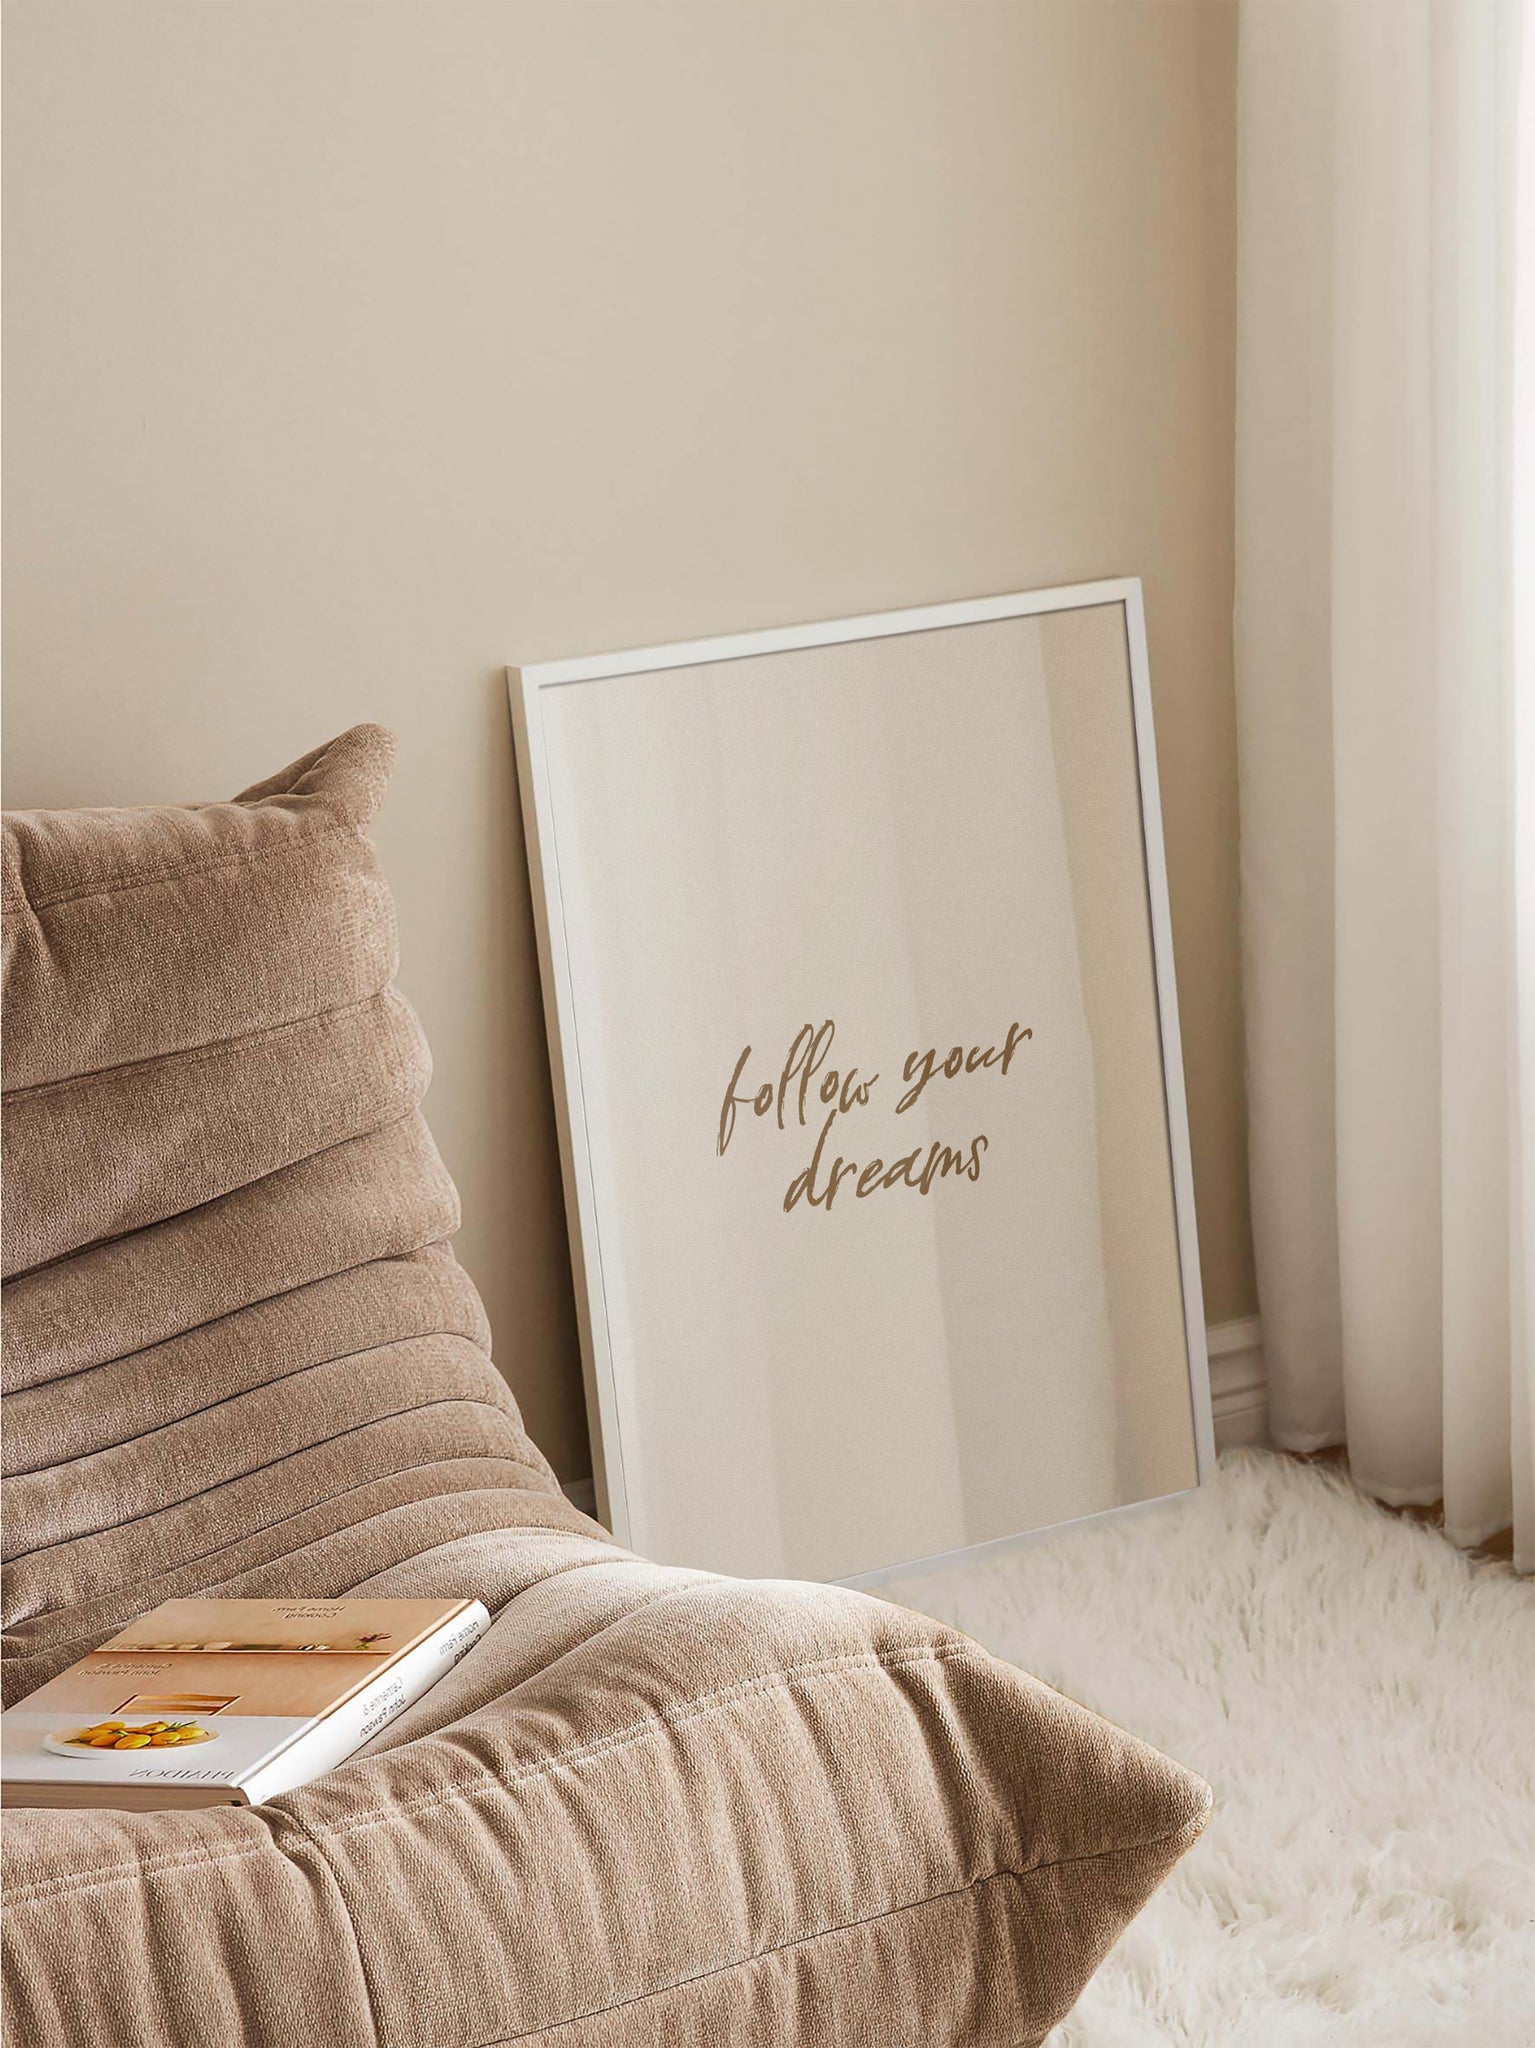 Follow Your Dreams poster